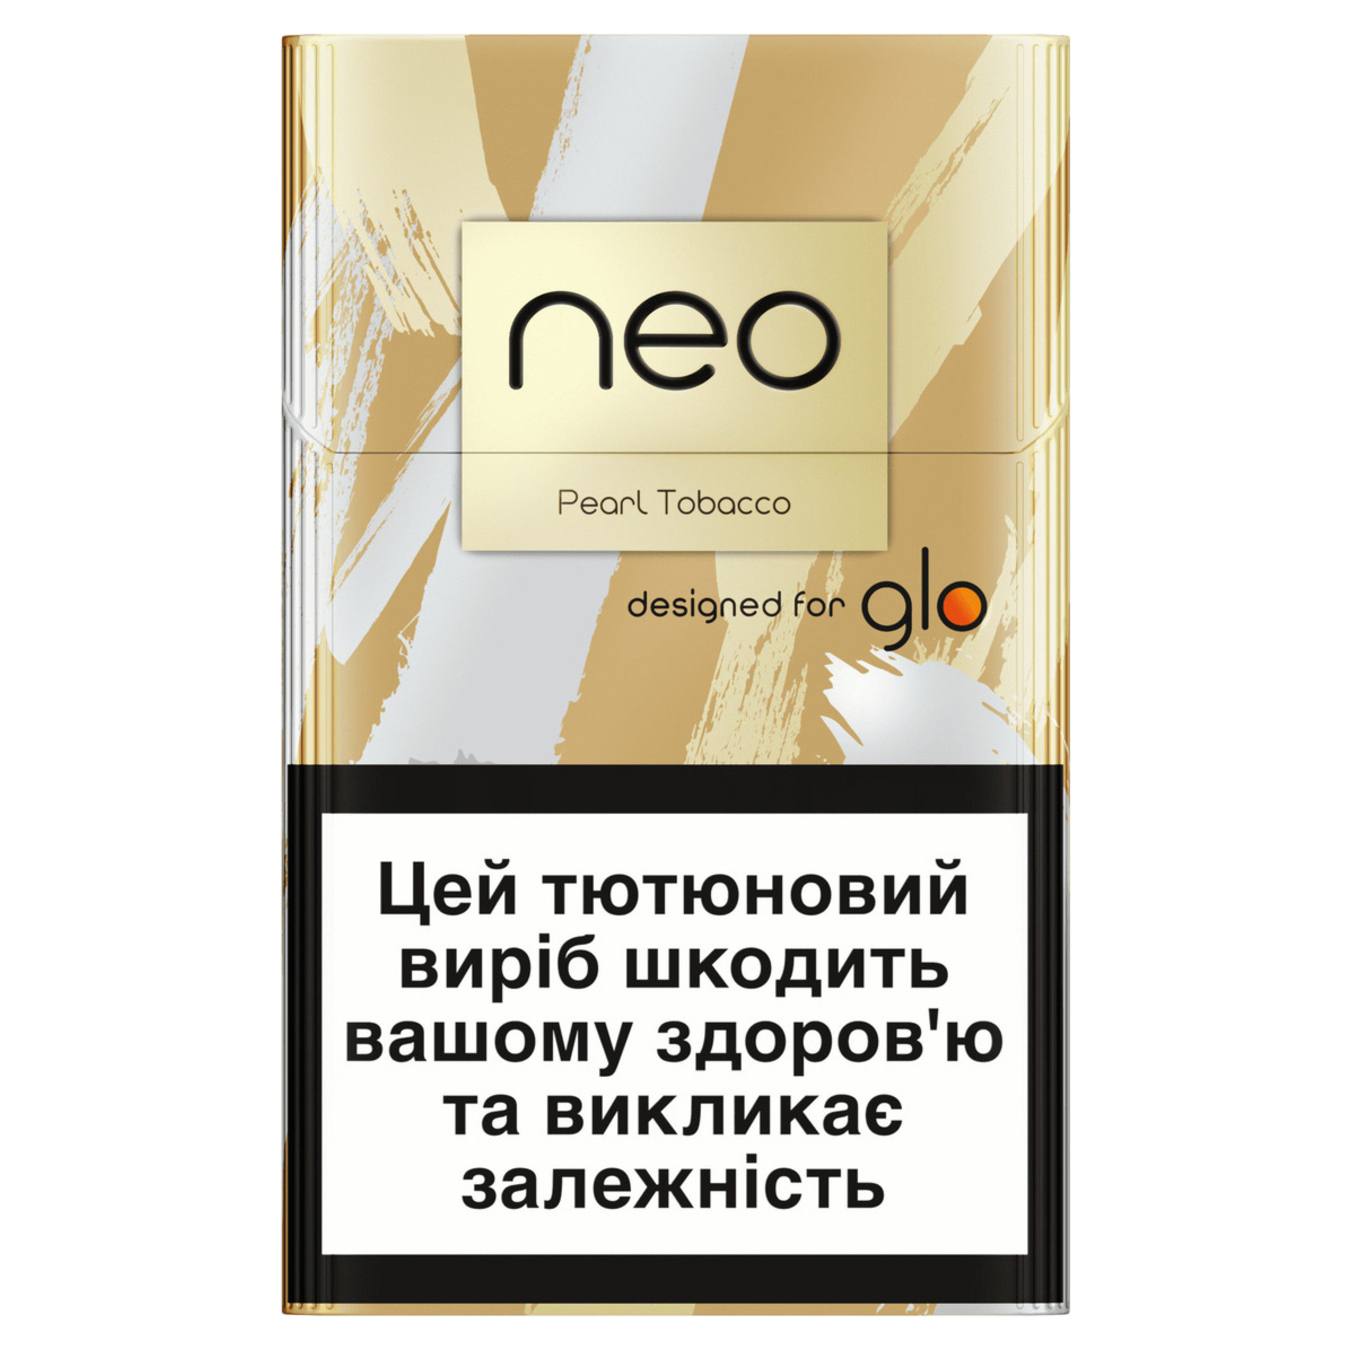 Sticks Neo Demi Pearl Tobacco 20pcs (the price is indicated without excise tax)